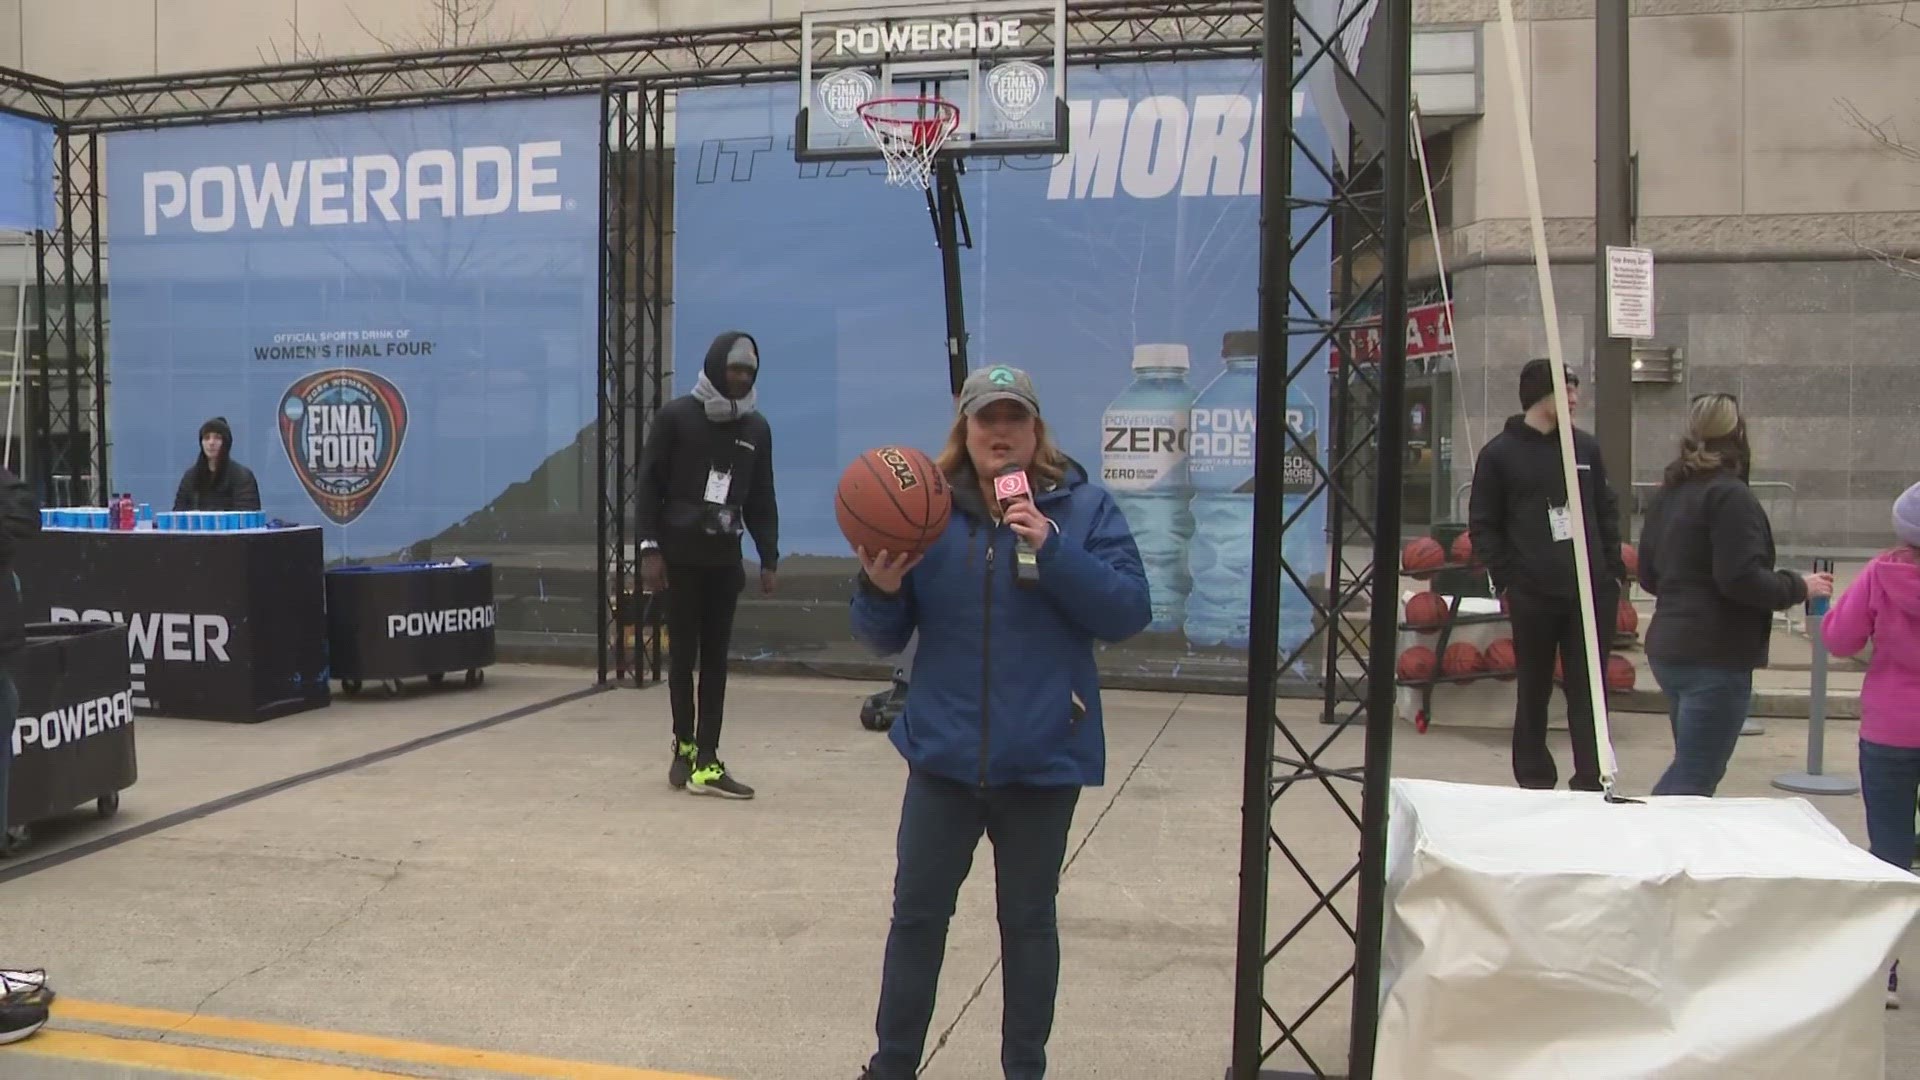 3News' Monica Robins reports — and makes a basket! — from the Party in the Plaza ahead of the NCAA Women's Final Four in Cleveland.